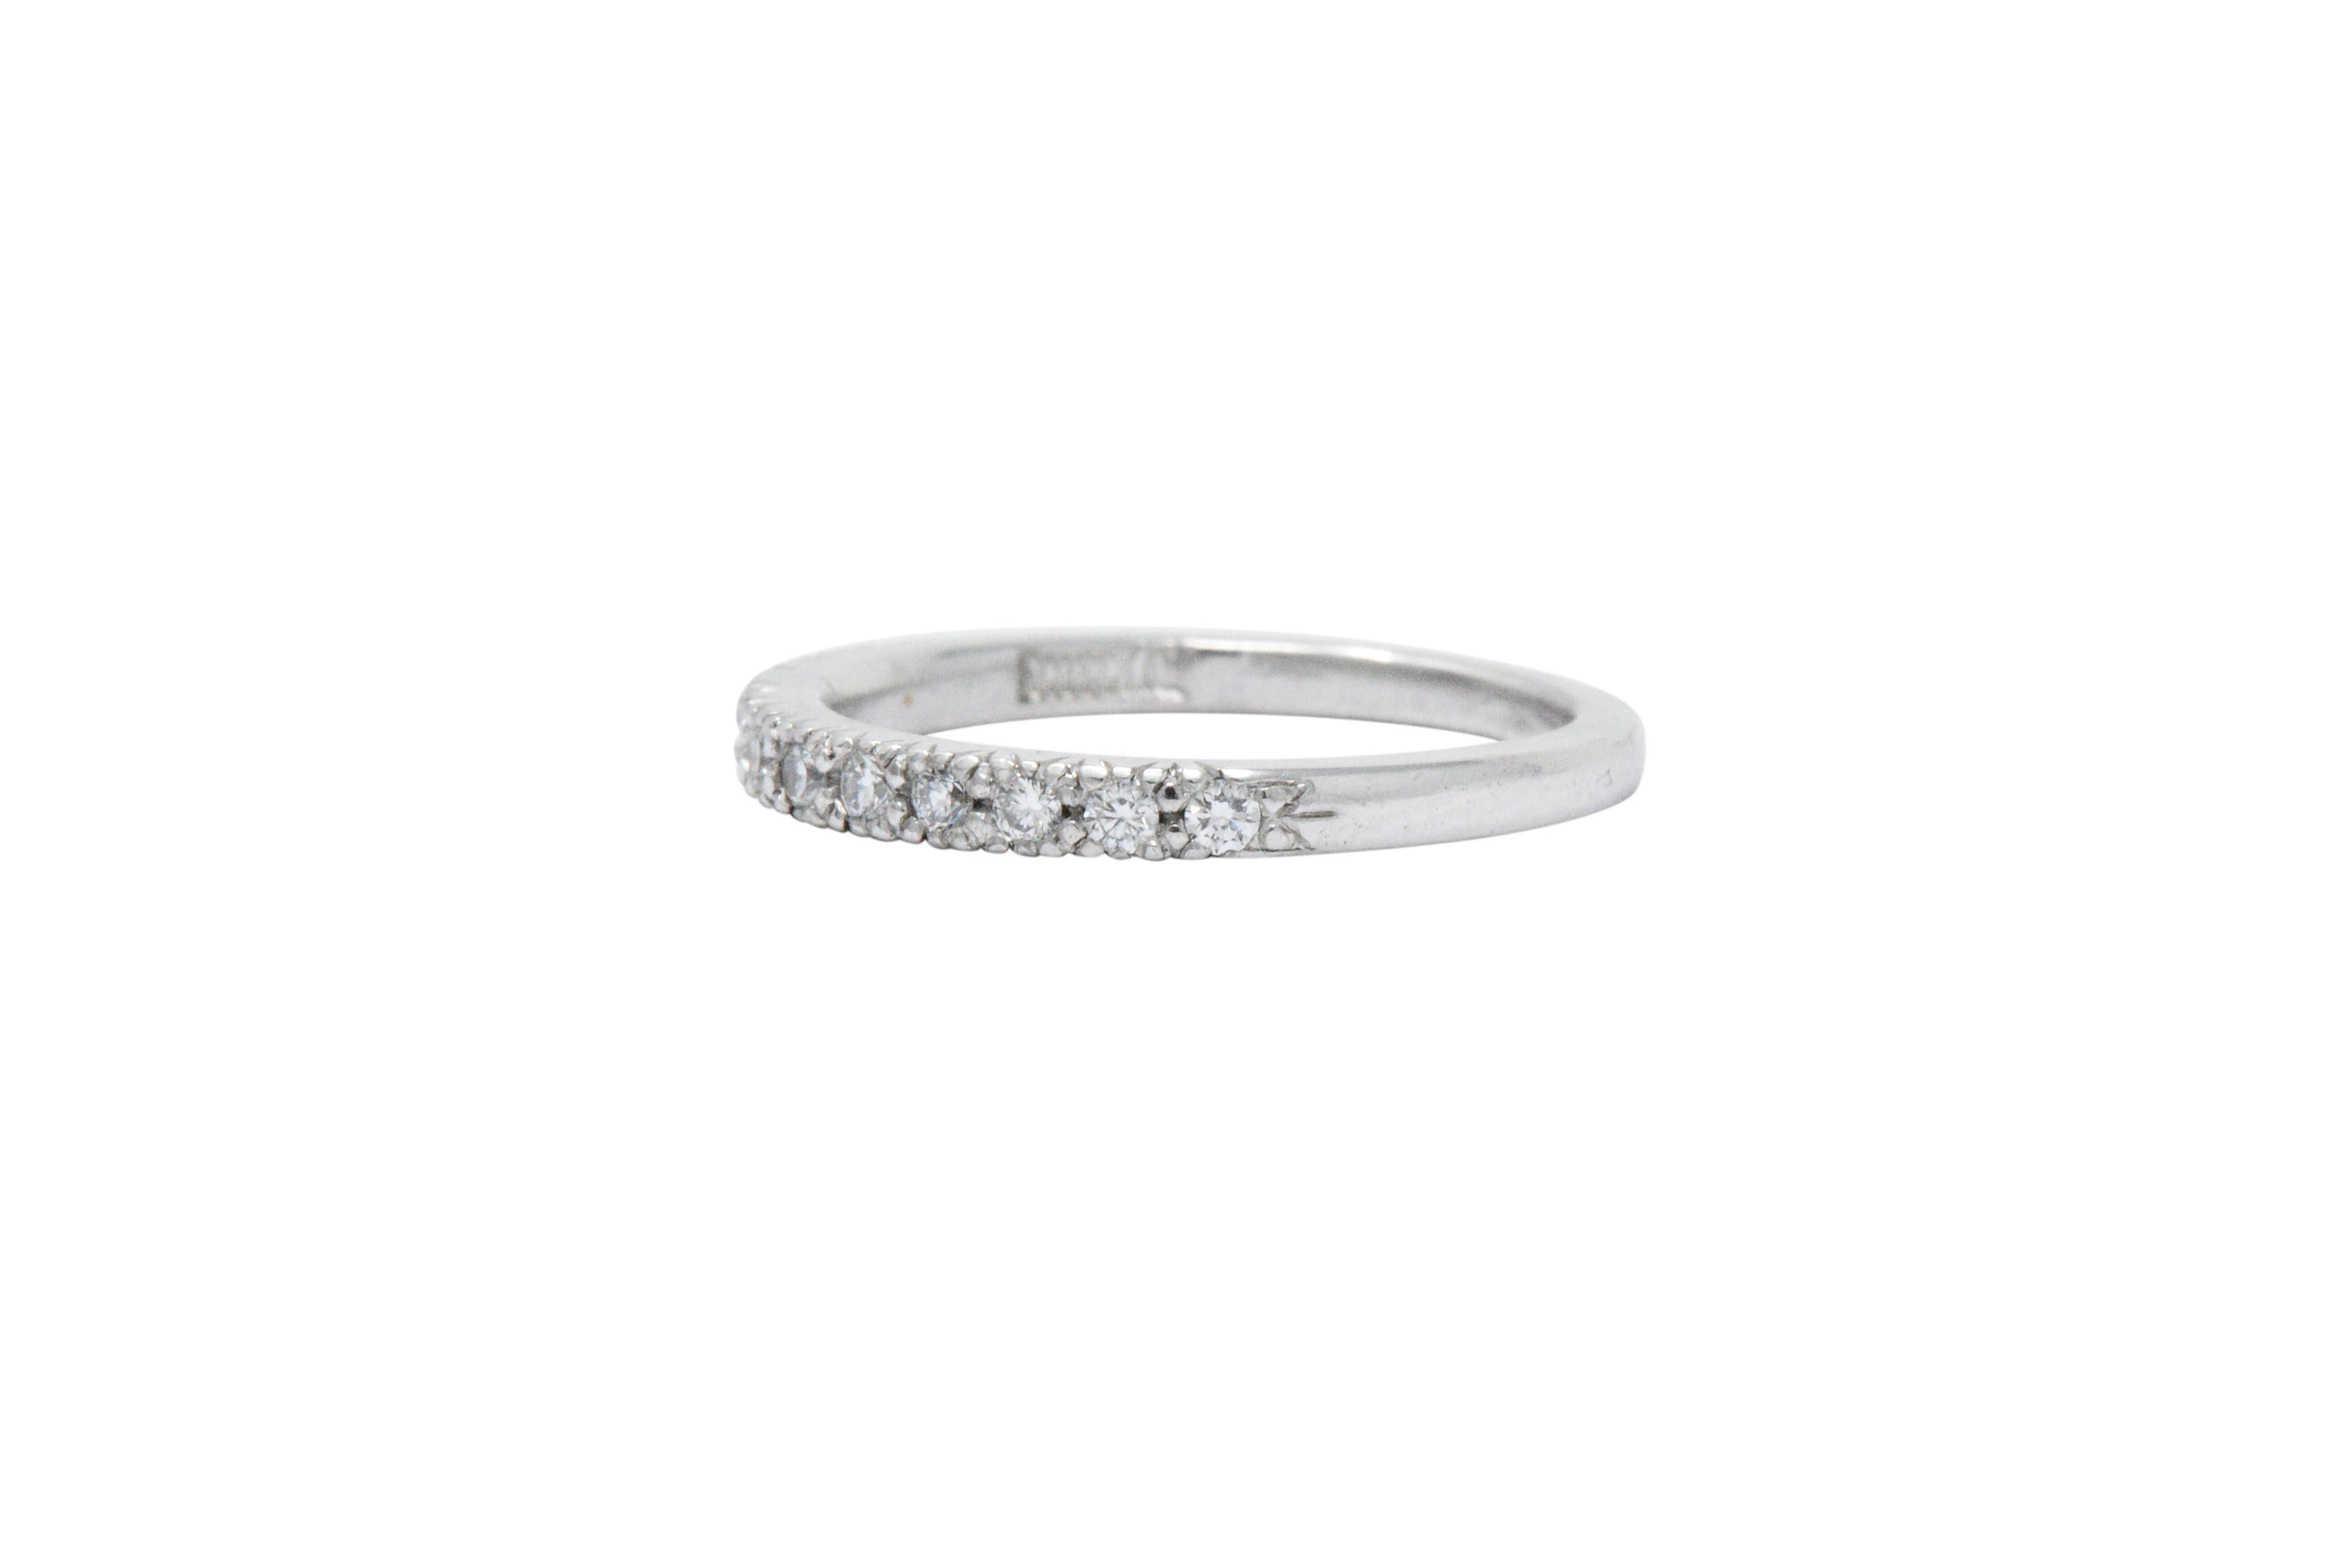 Set to the front with round brilliant cut diamonds, approximately 0.25 carats total, G/H color, VS to SI clarity, bead set

Fully signed Scott Kay

Ring Size: 5 & Sizable

Top measures 2.1 mm wide and sits 2.0 mm high

Total Weight: 2.9